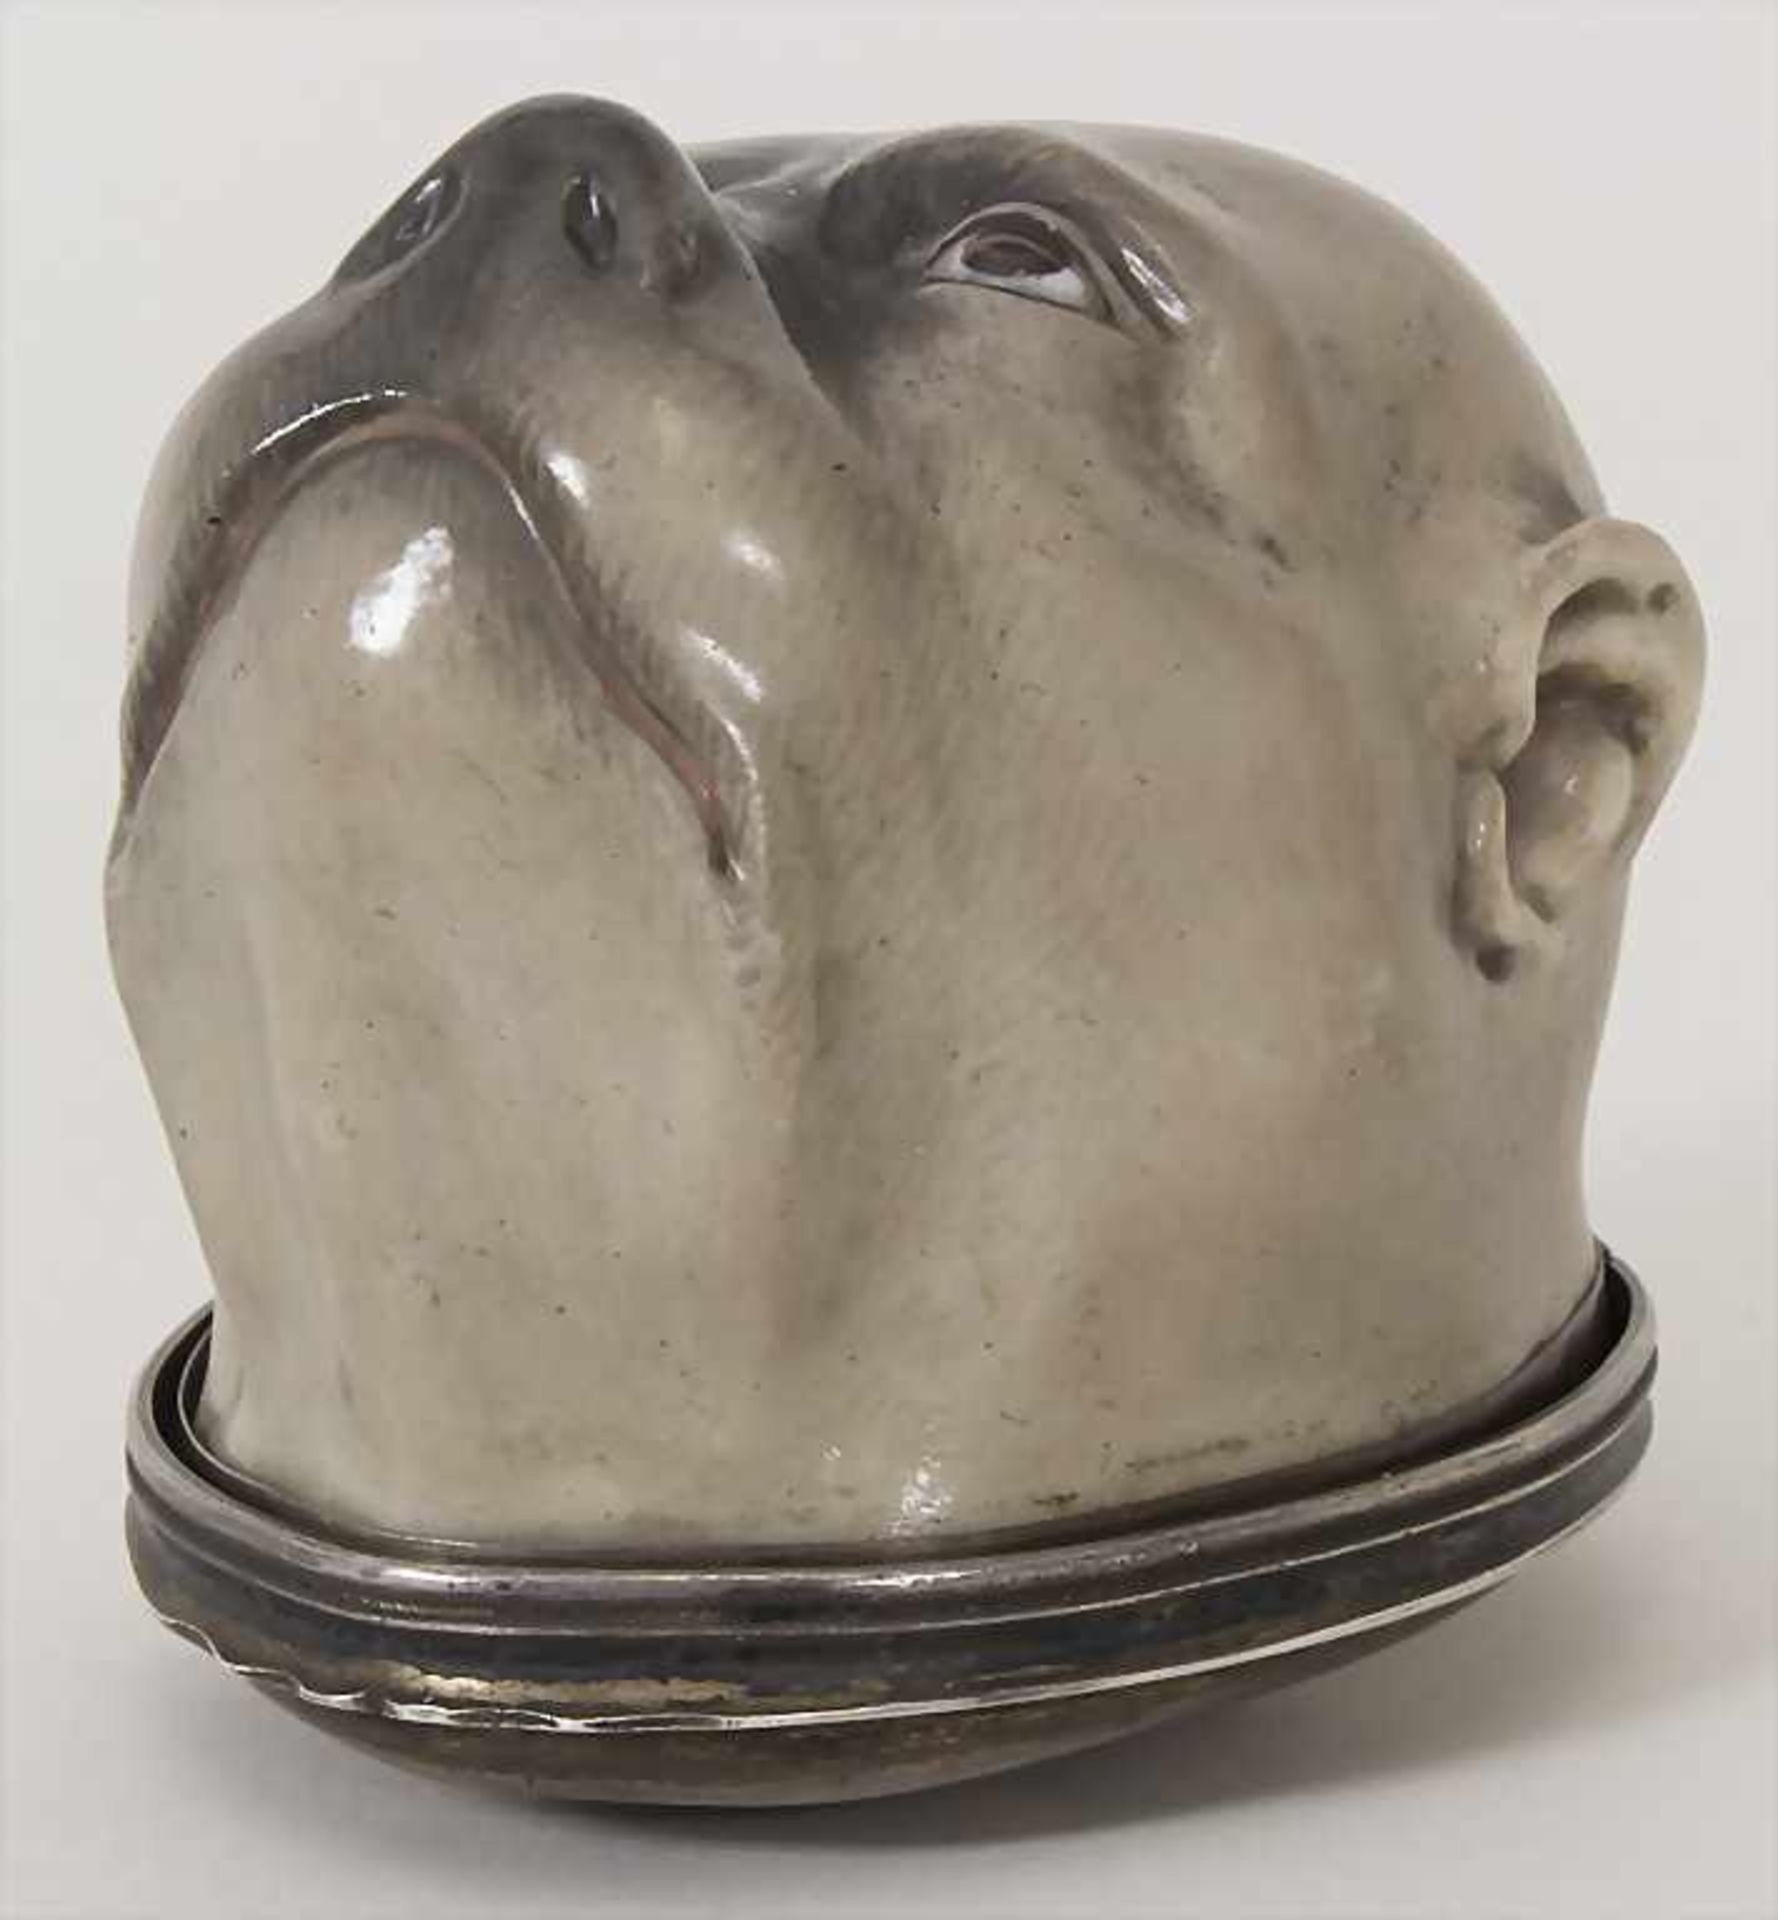 Tabatiere 'Mopskopf' / A snuff-box in the form of a pug's head, Meissen, um 1750Material: Porzellan, - Image 5 of 11